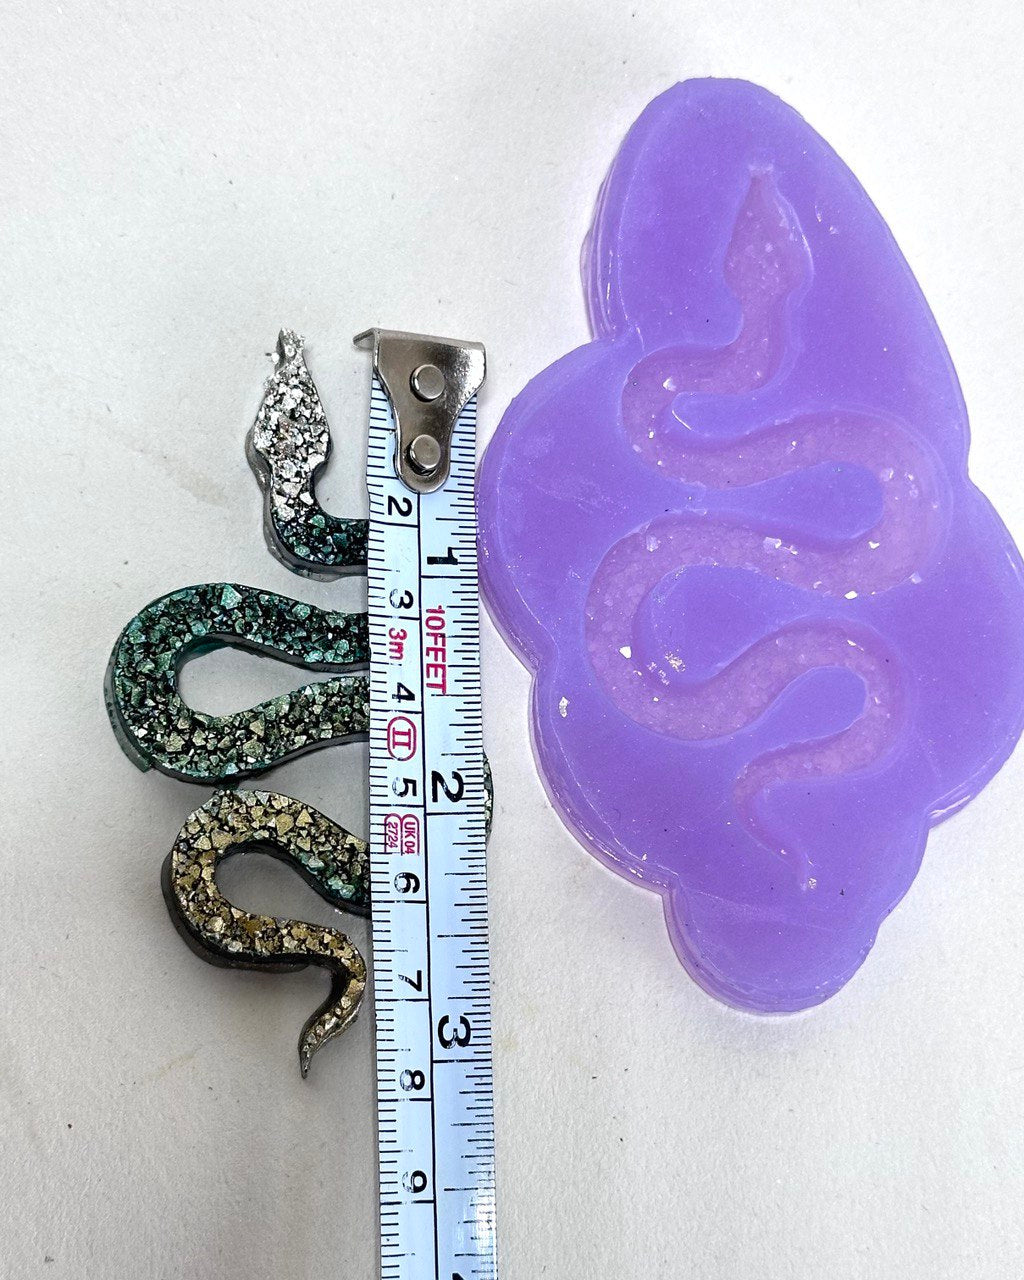 Crystal Snake Silicone Mold